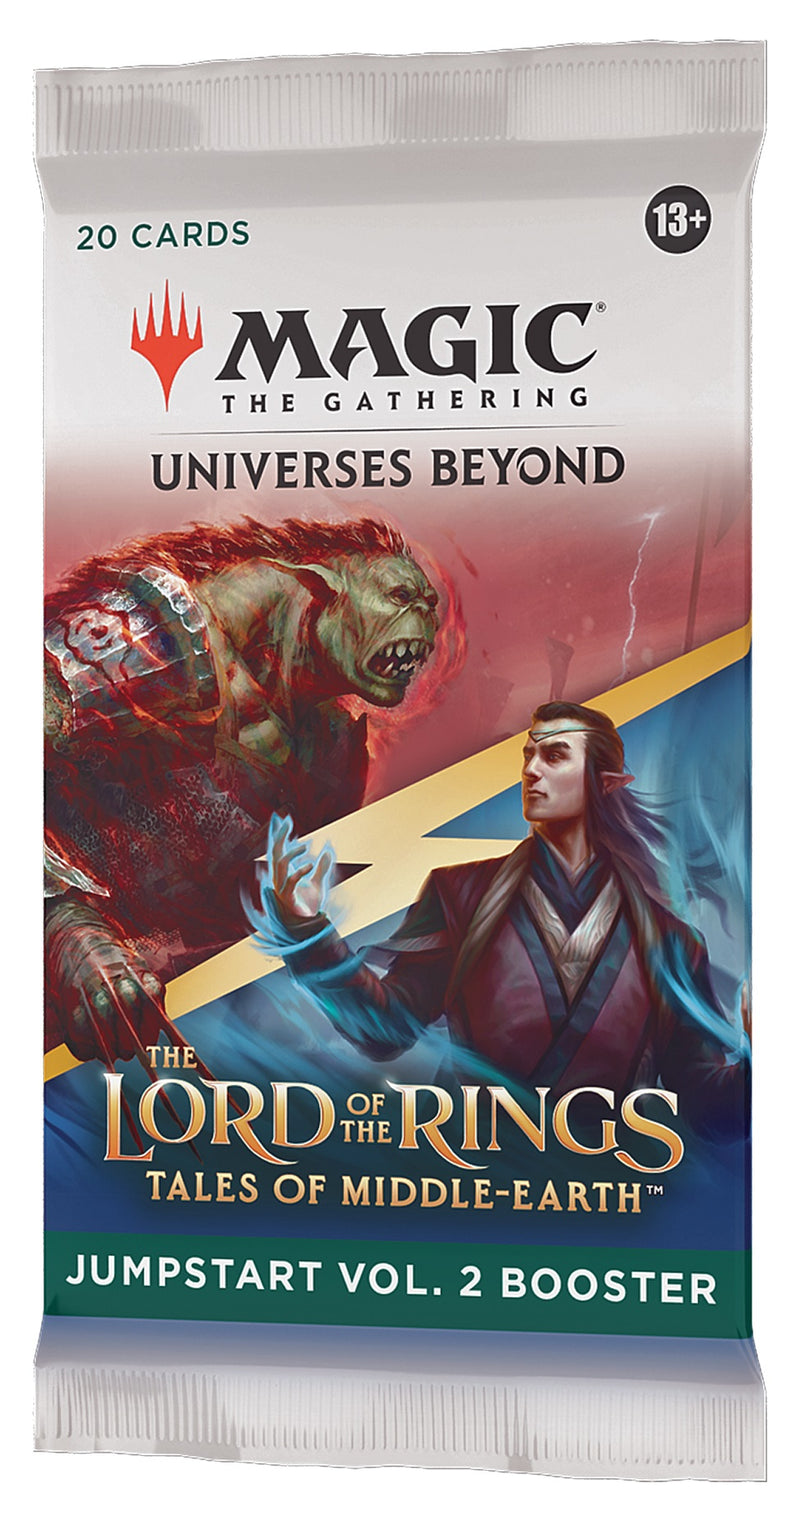 The Lord of the Rings: Tales of Middle-Earth: Jumpstart Vol. 2 Booster Pack